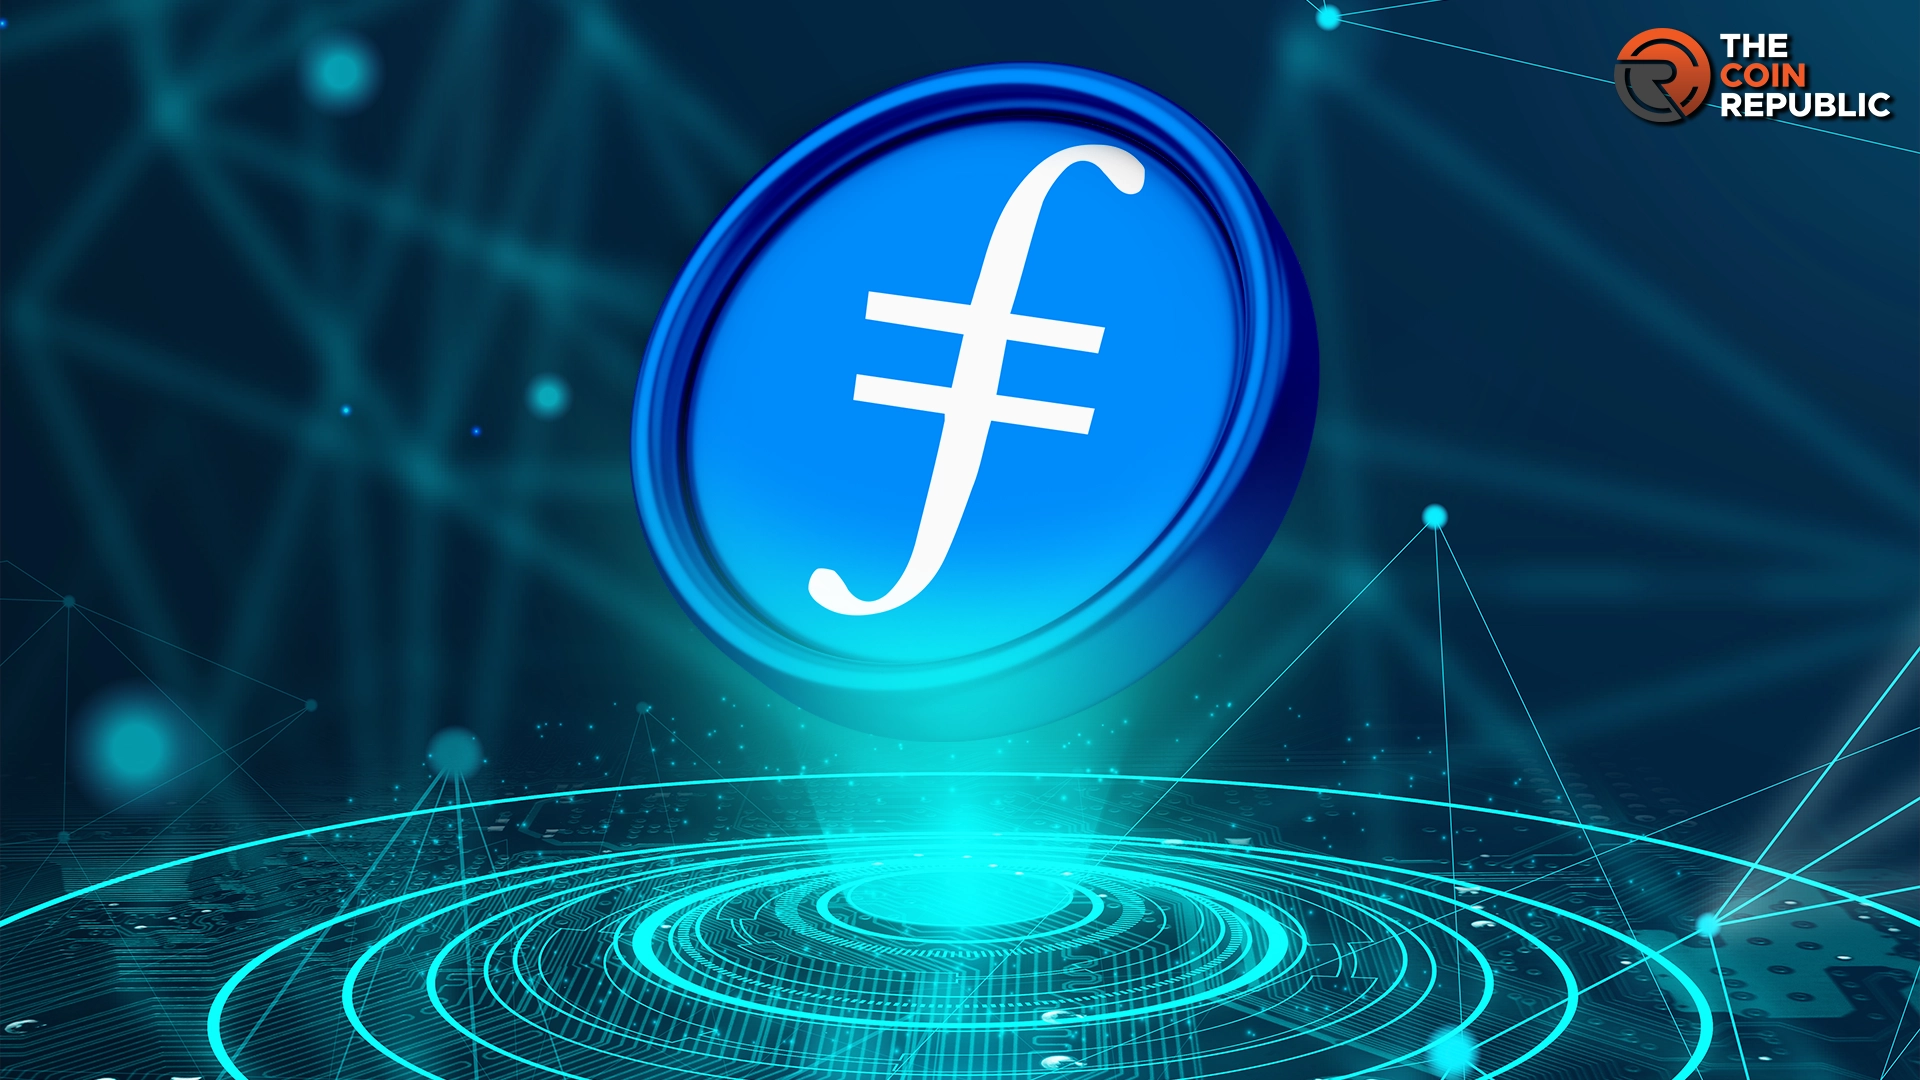 FIL Price Gained 19% in One Year; Will This Slow Trend Continue?